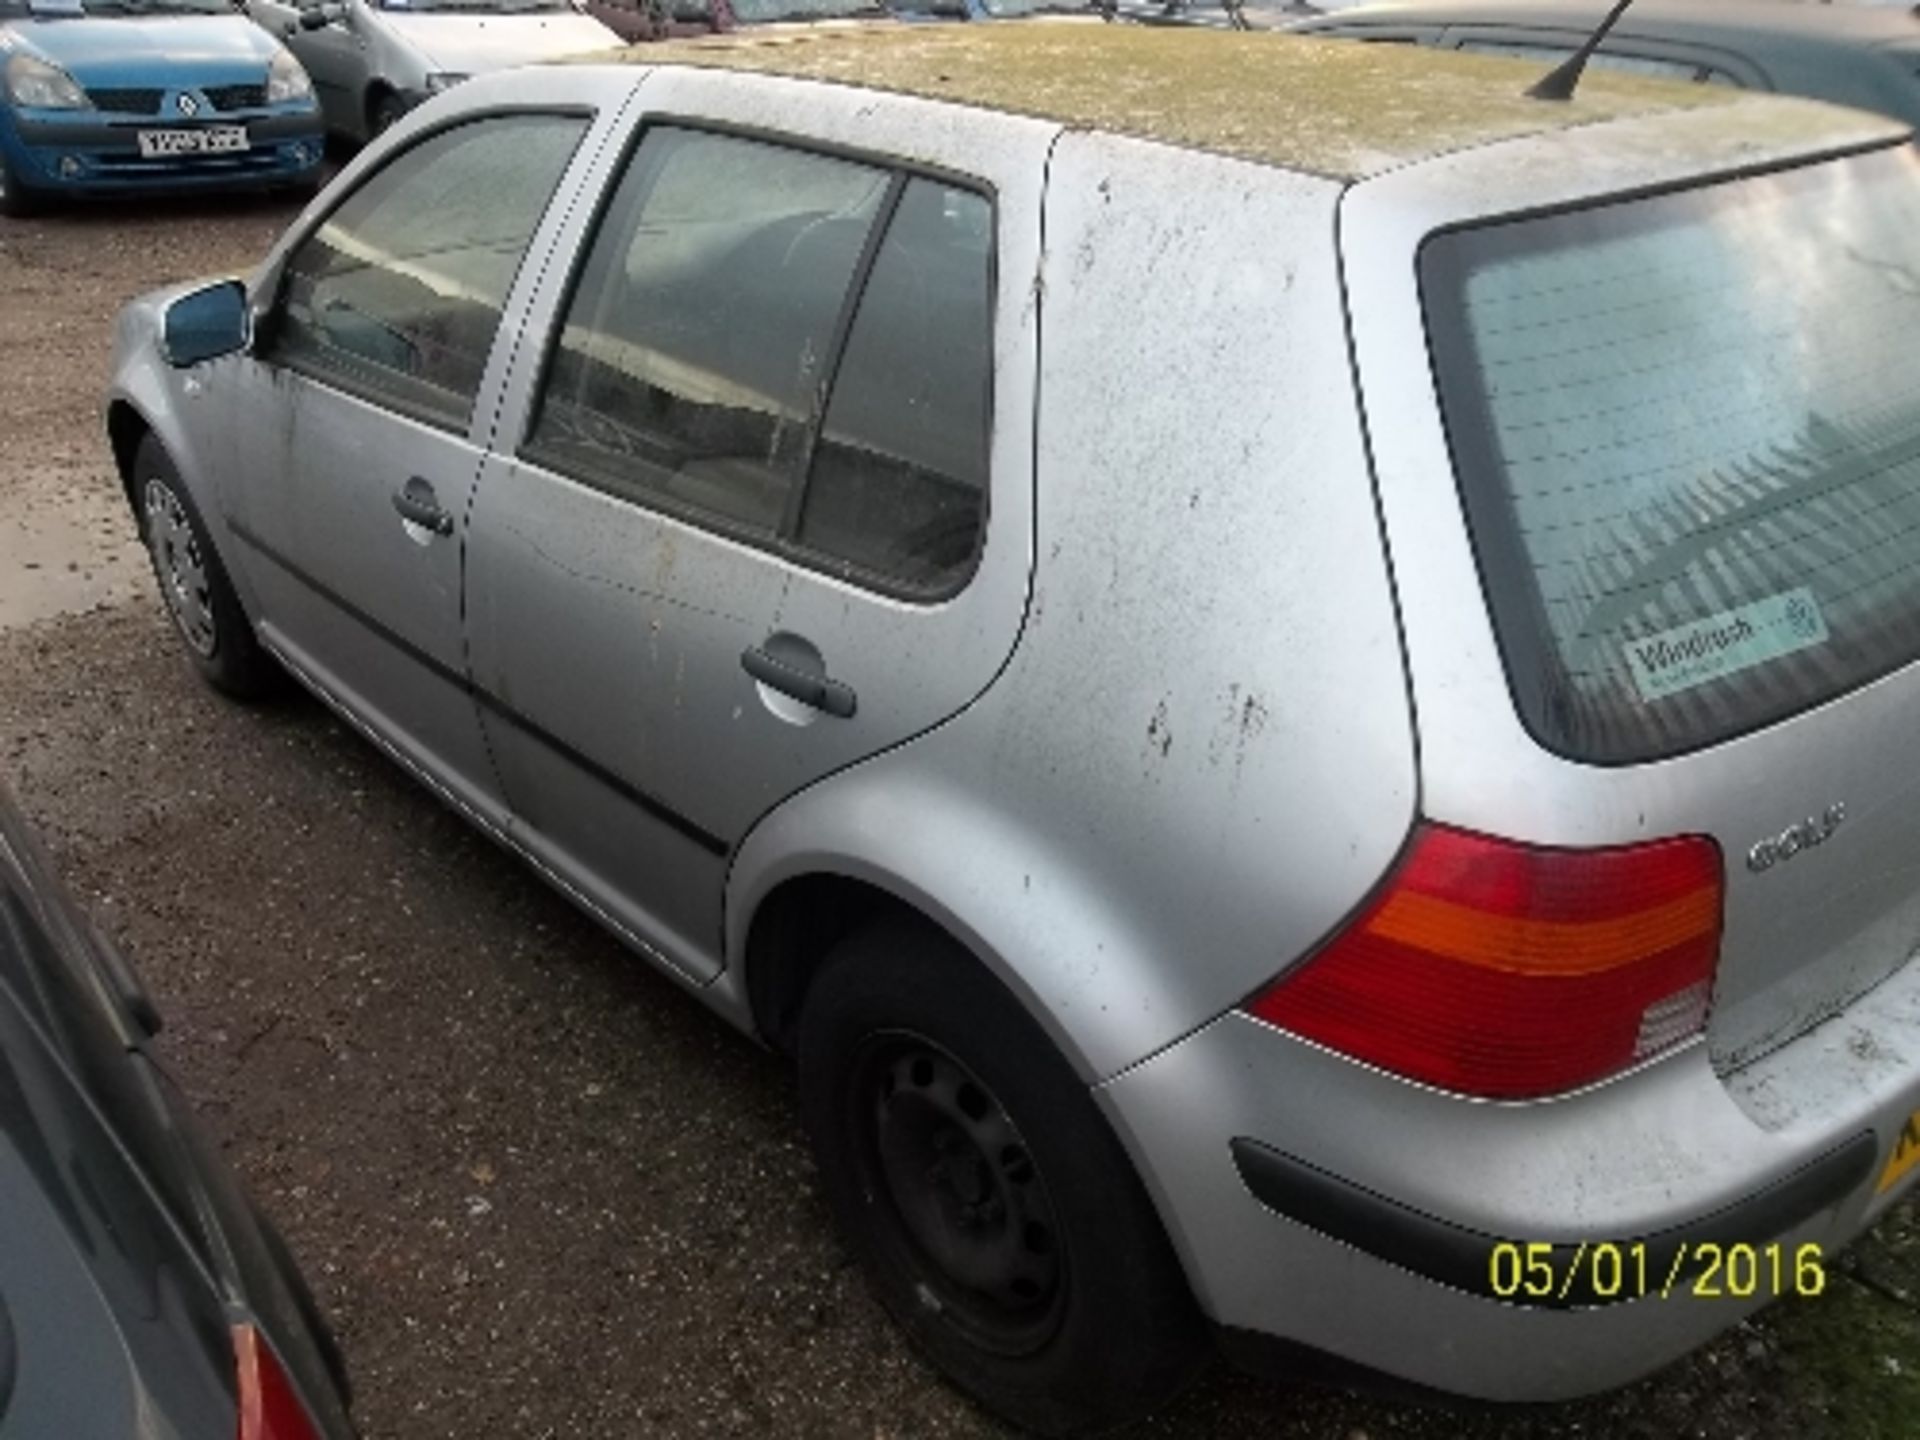 Volkswagen Golf S - X894 MGM Date of registration: 31.10.2000 1598cc, petrol, manual, silver - Image 4 of 4